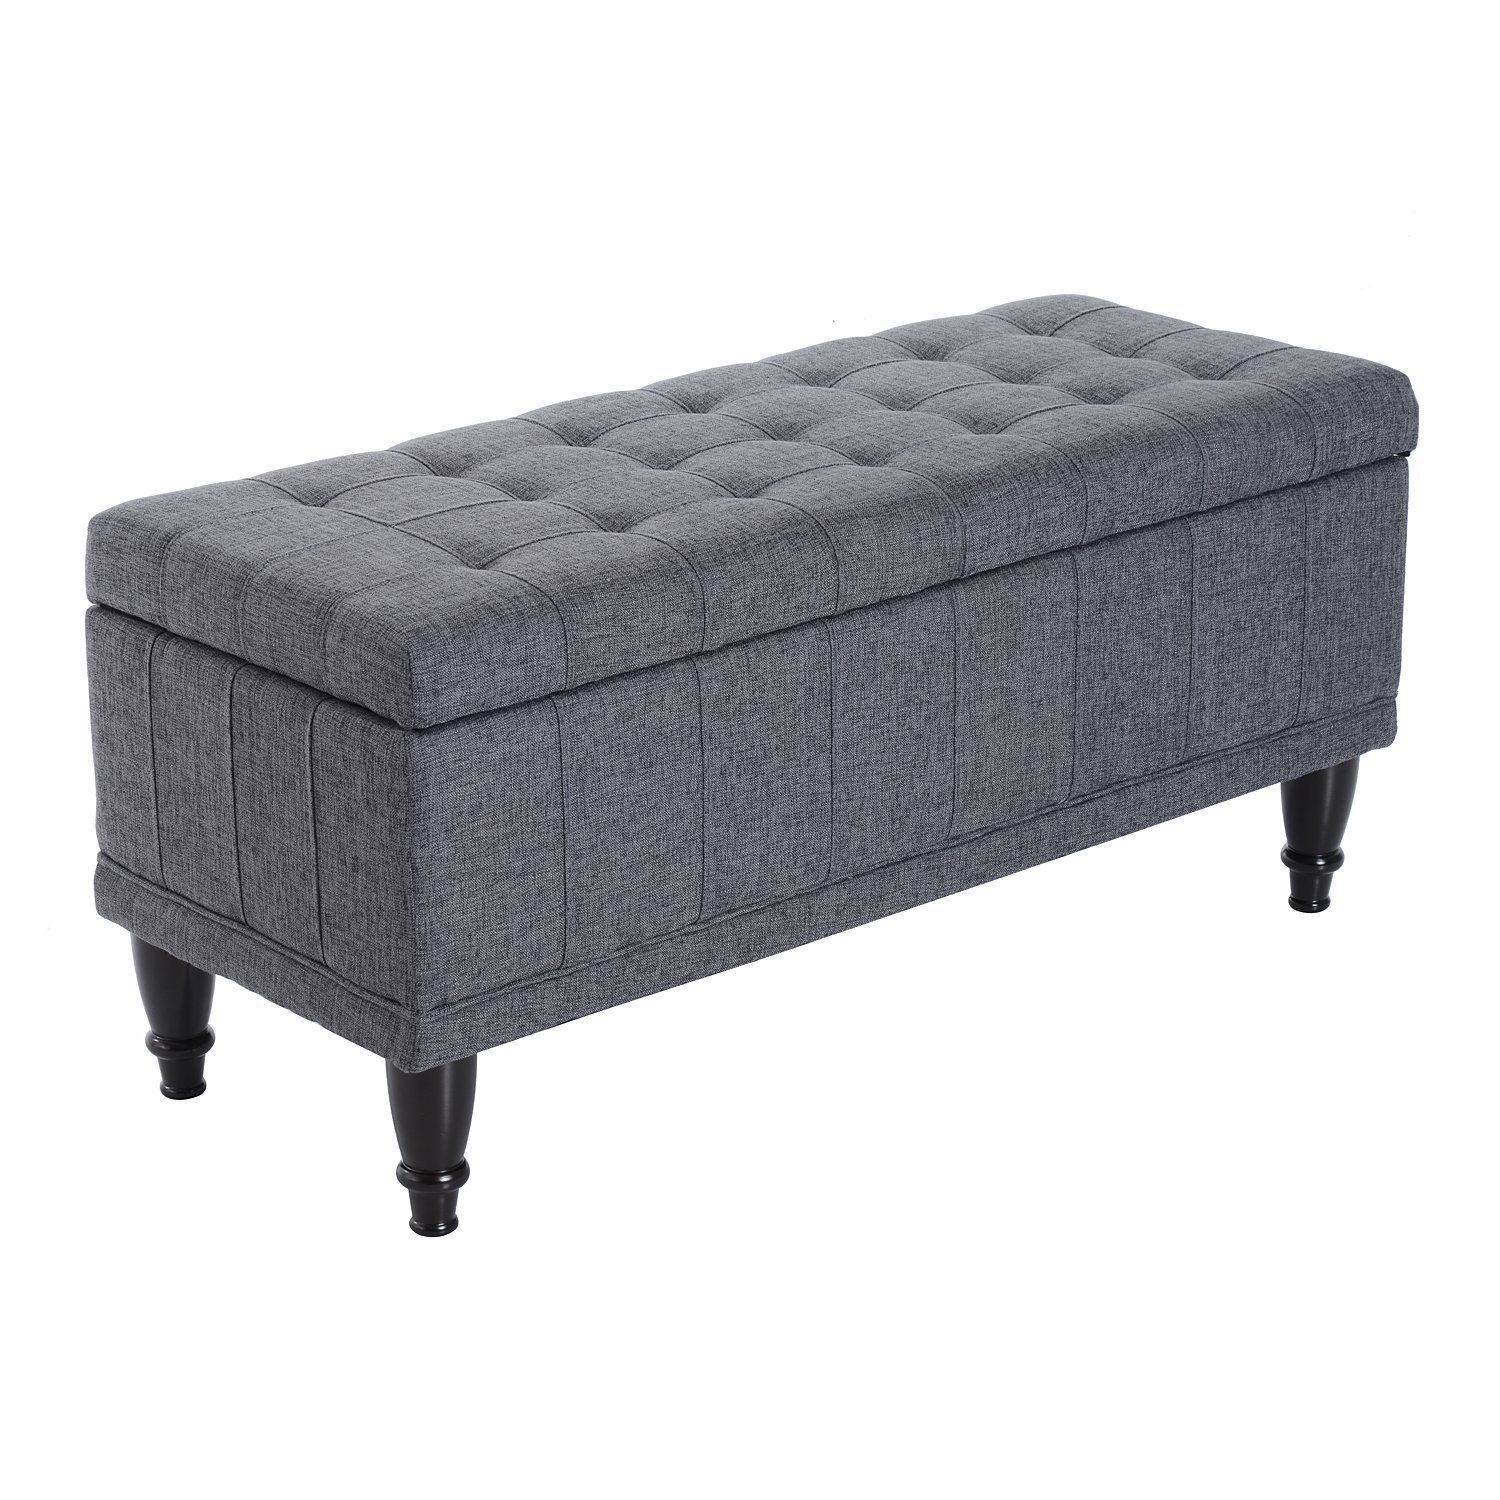 Homcom Large 42" Tufted Linen Fabric Ottoman Storage Bench With Soft Regarding Lavender Fabric Storage Ottomans (View 2 of 20)